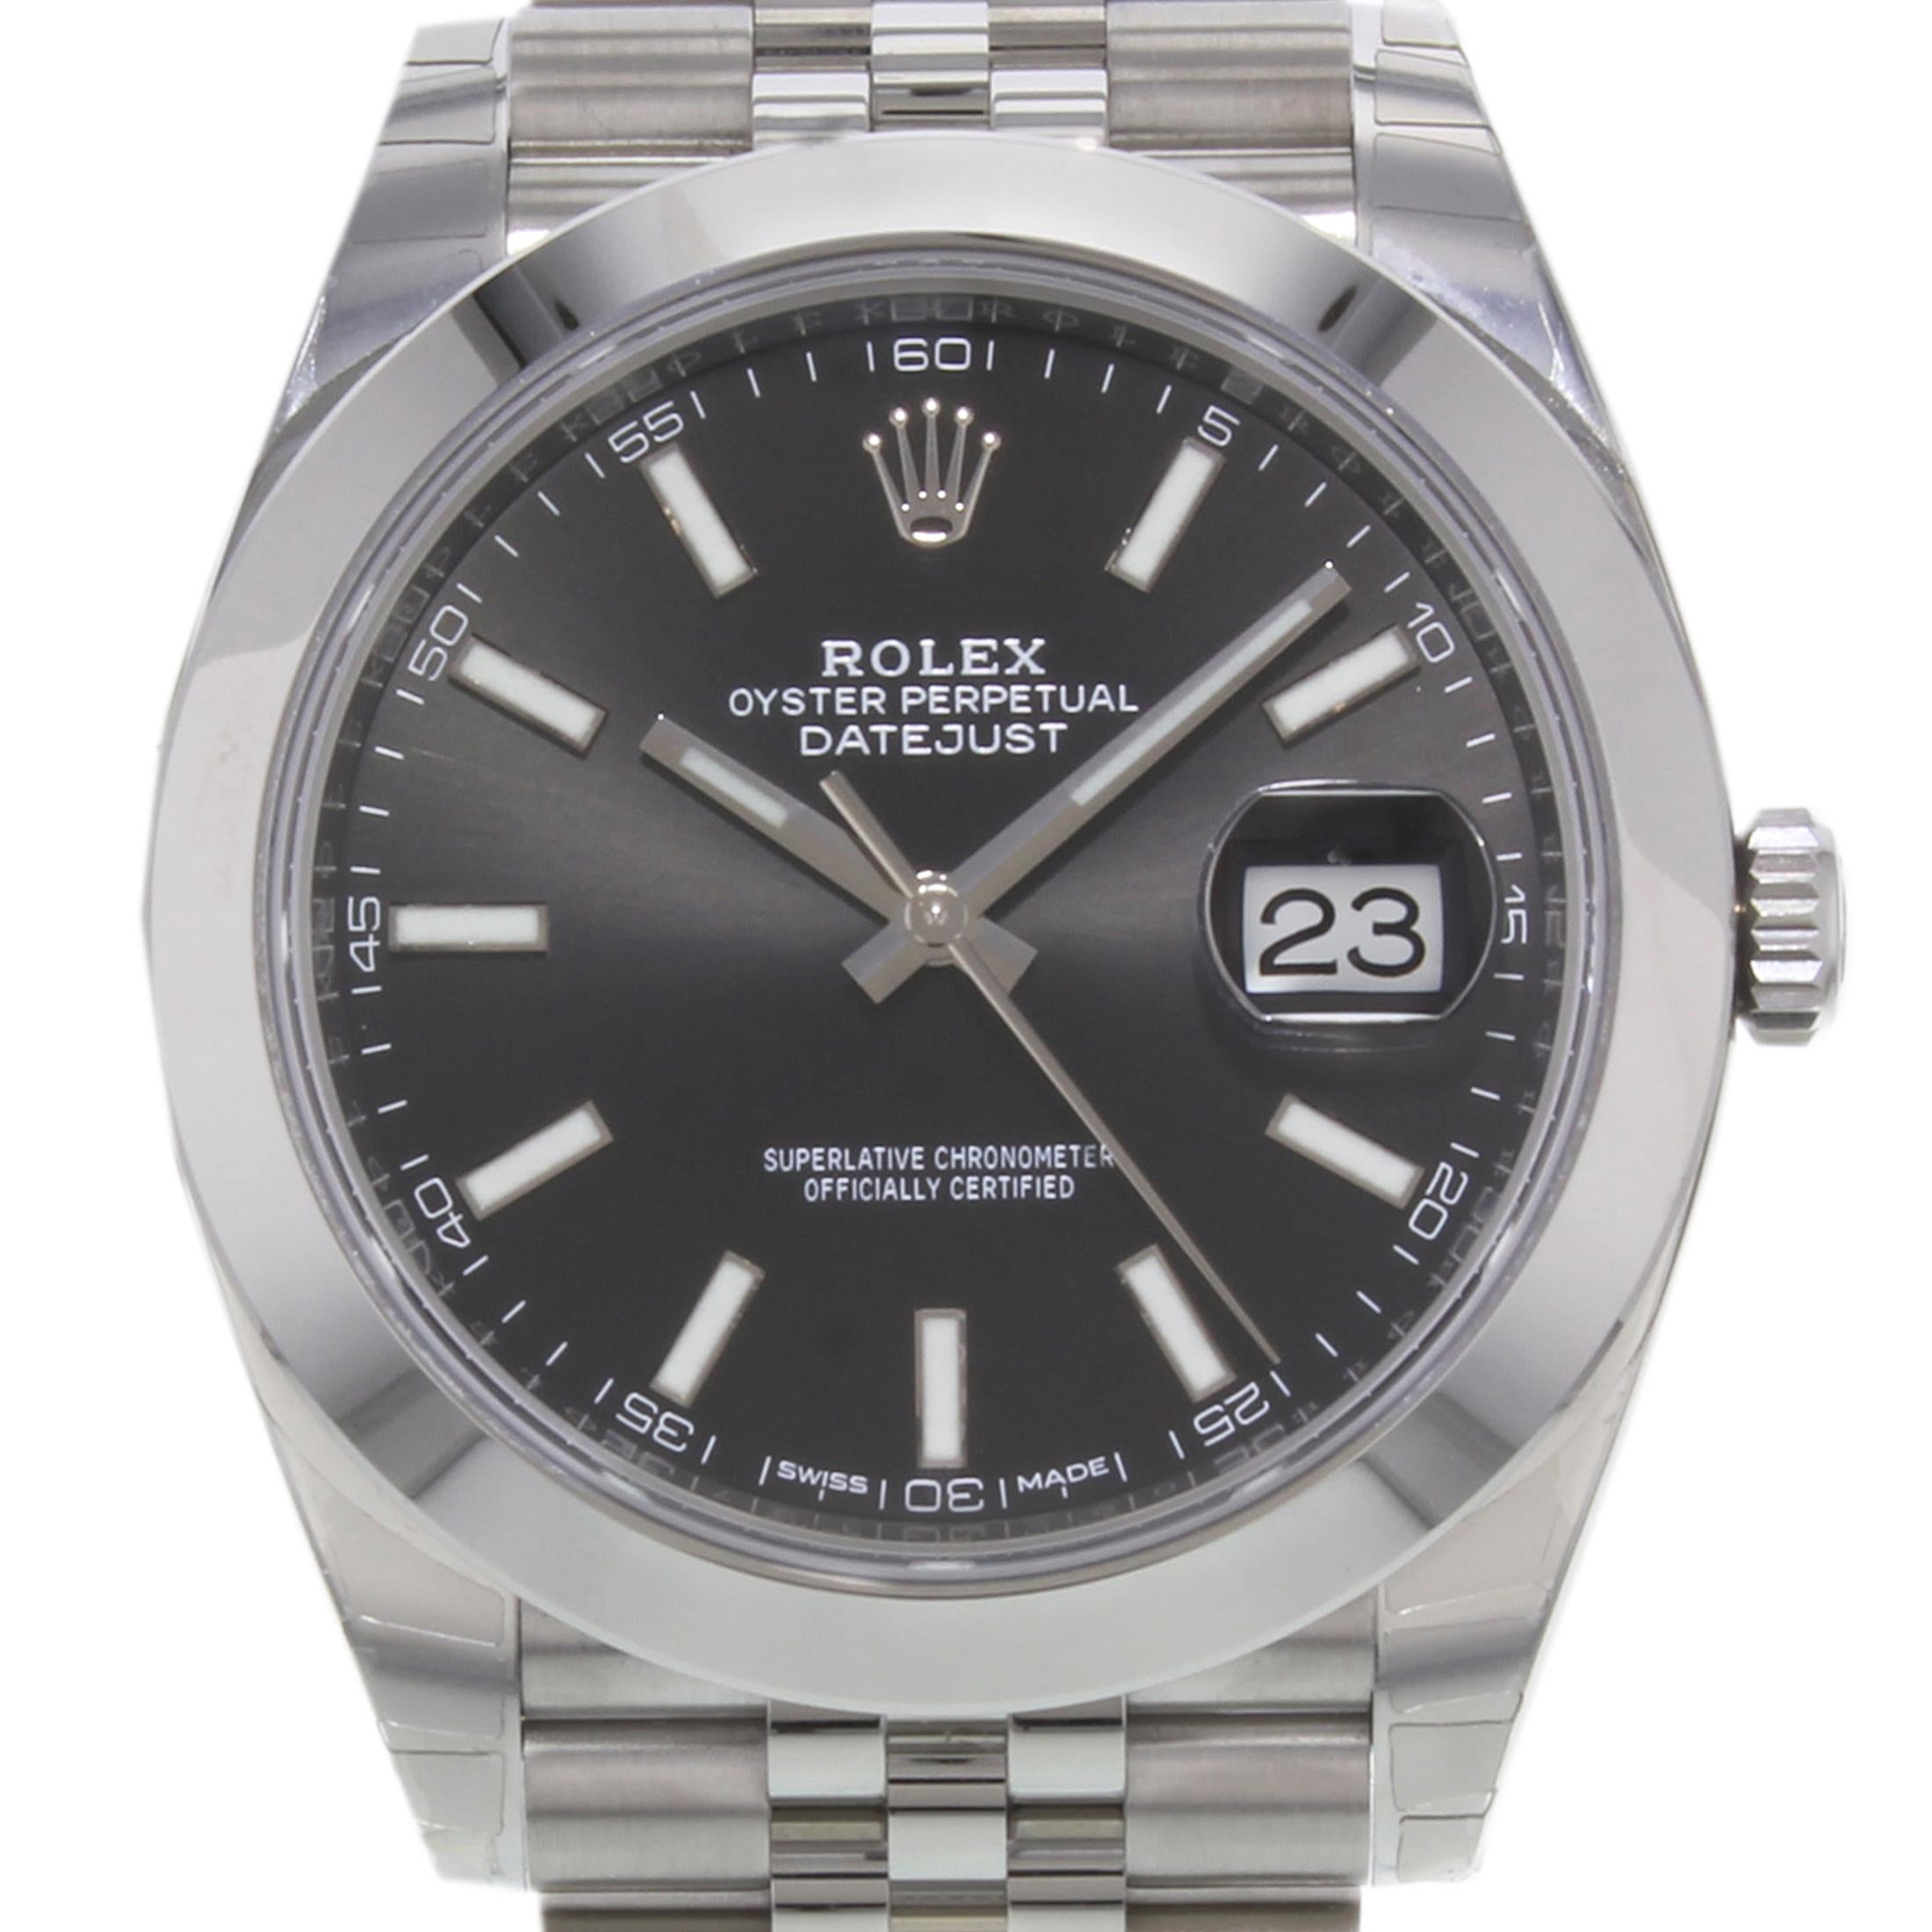 (19559)
This brand new Rolex Datejust 41 126300 bkij is a beautiful men's timepiece that is powered by an automatic movement which is cased in a stainless steel case. It has a round shape face, date dial and has hand sticks style markers. It is